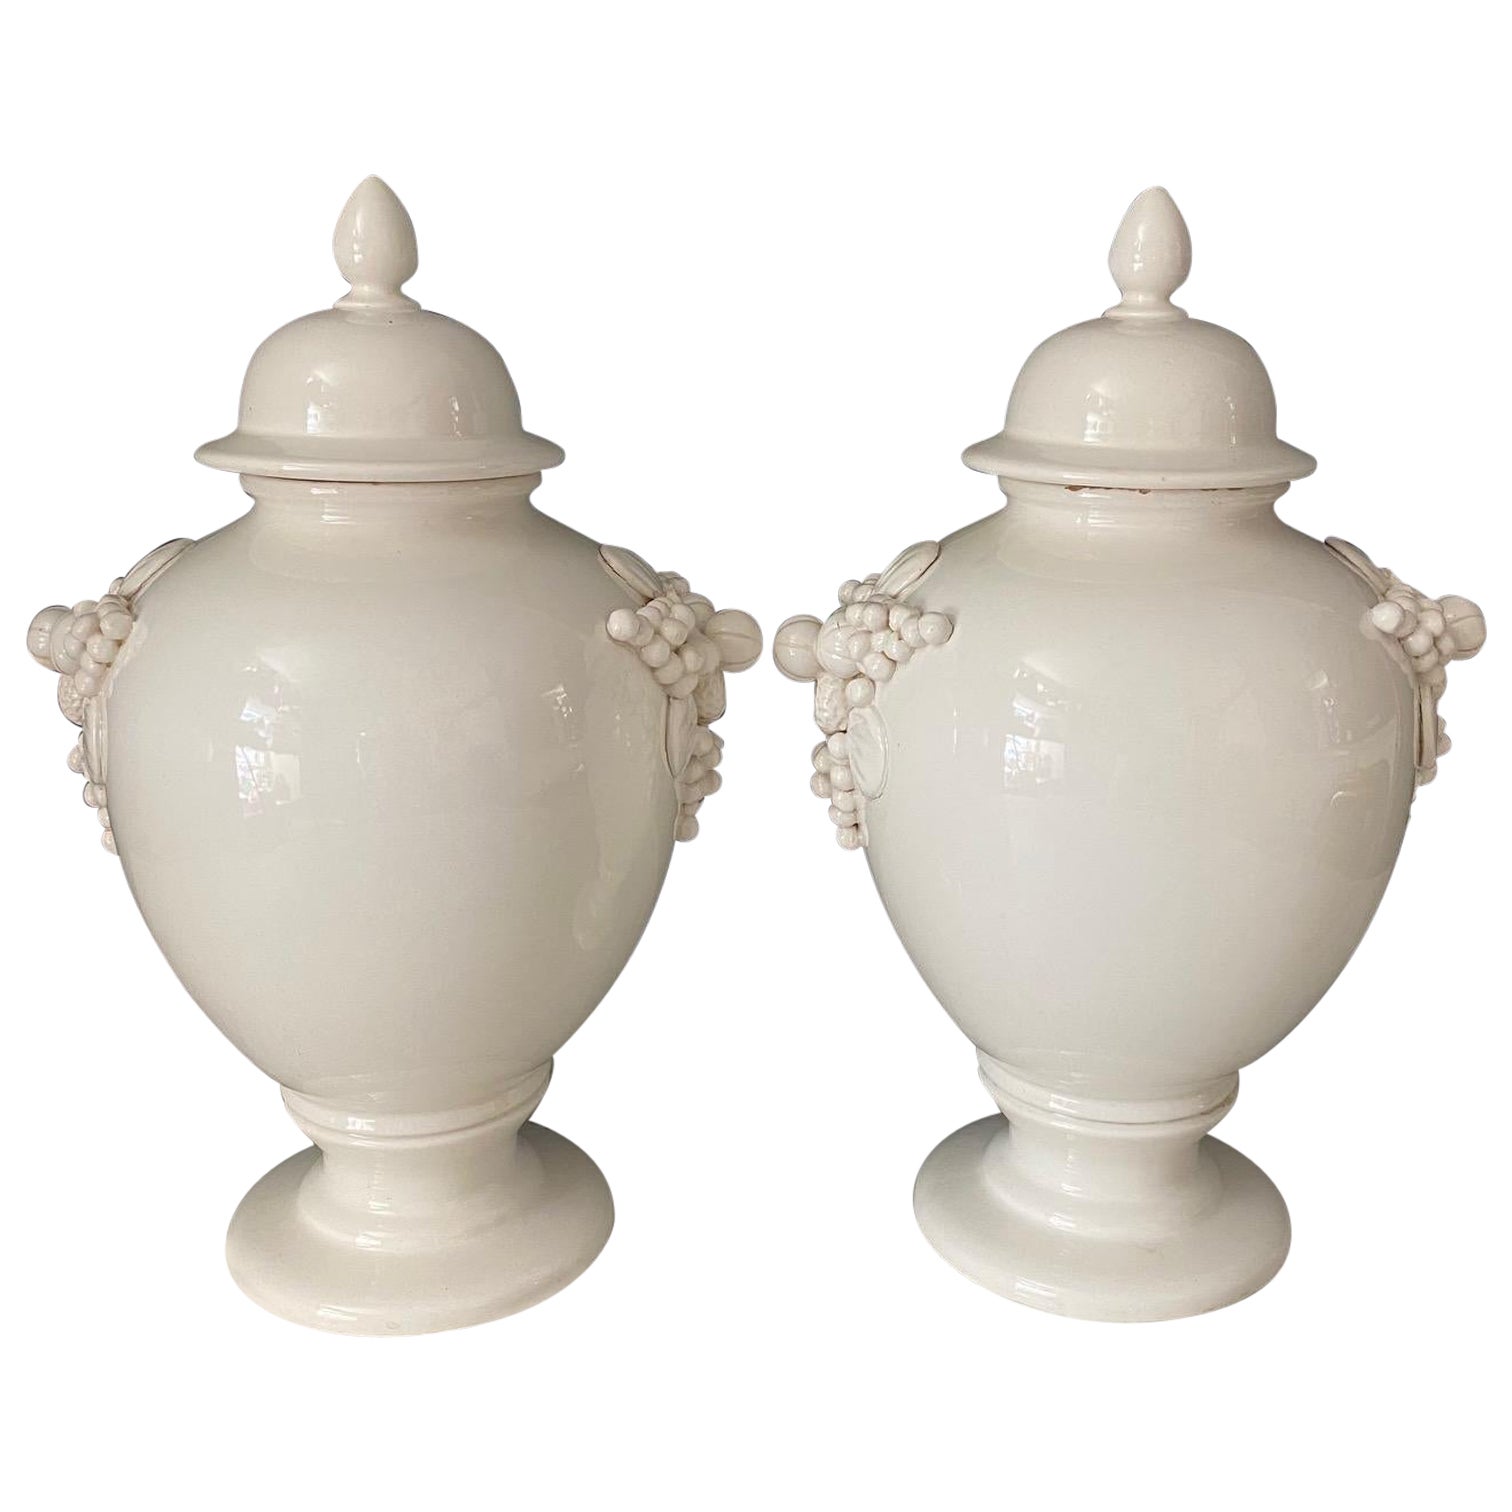  Large Antique Italian Pair of White Ceramic Apothecary Style Urn Vases  For Sale